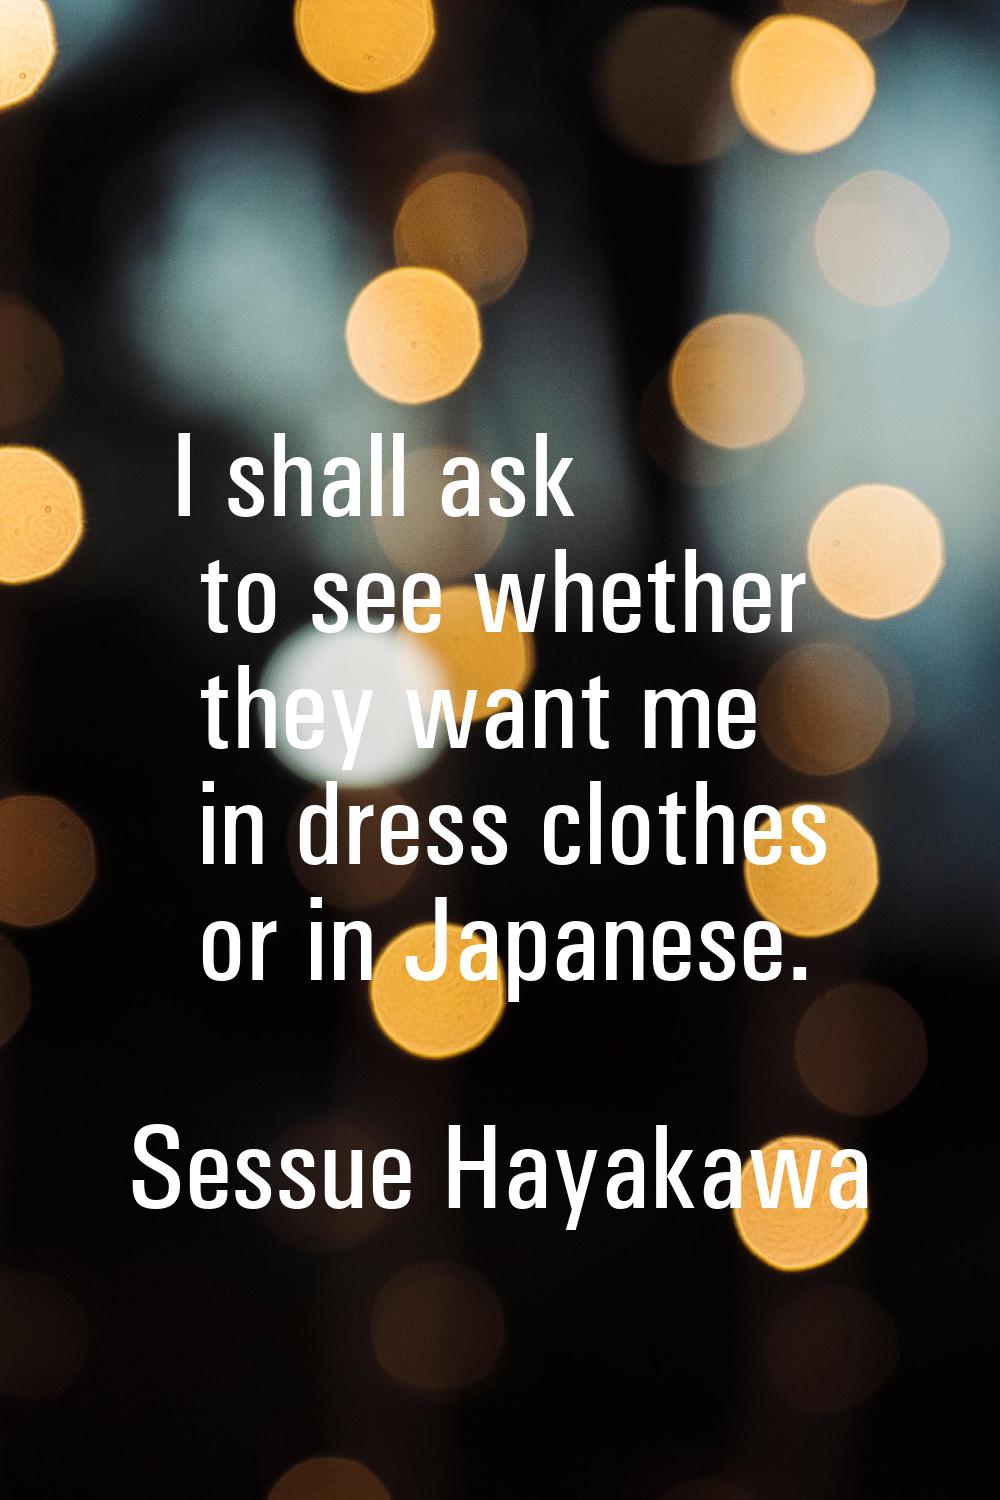 I shall ask to see whether they want me in dress clothes or in Japanese.